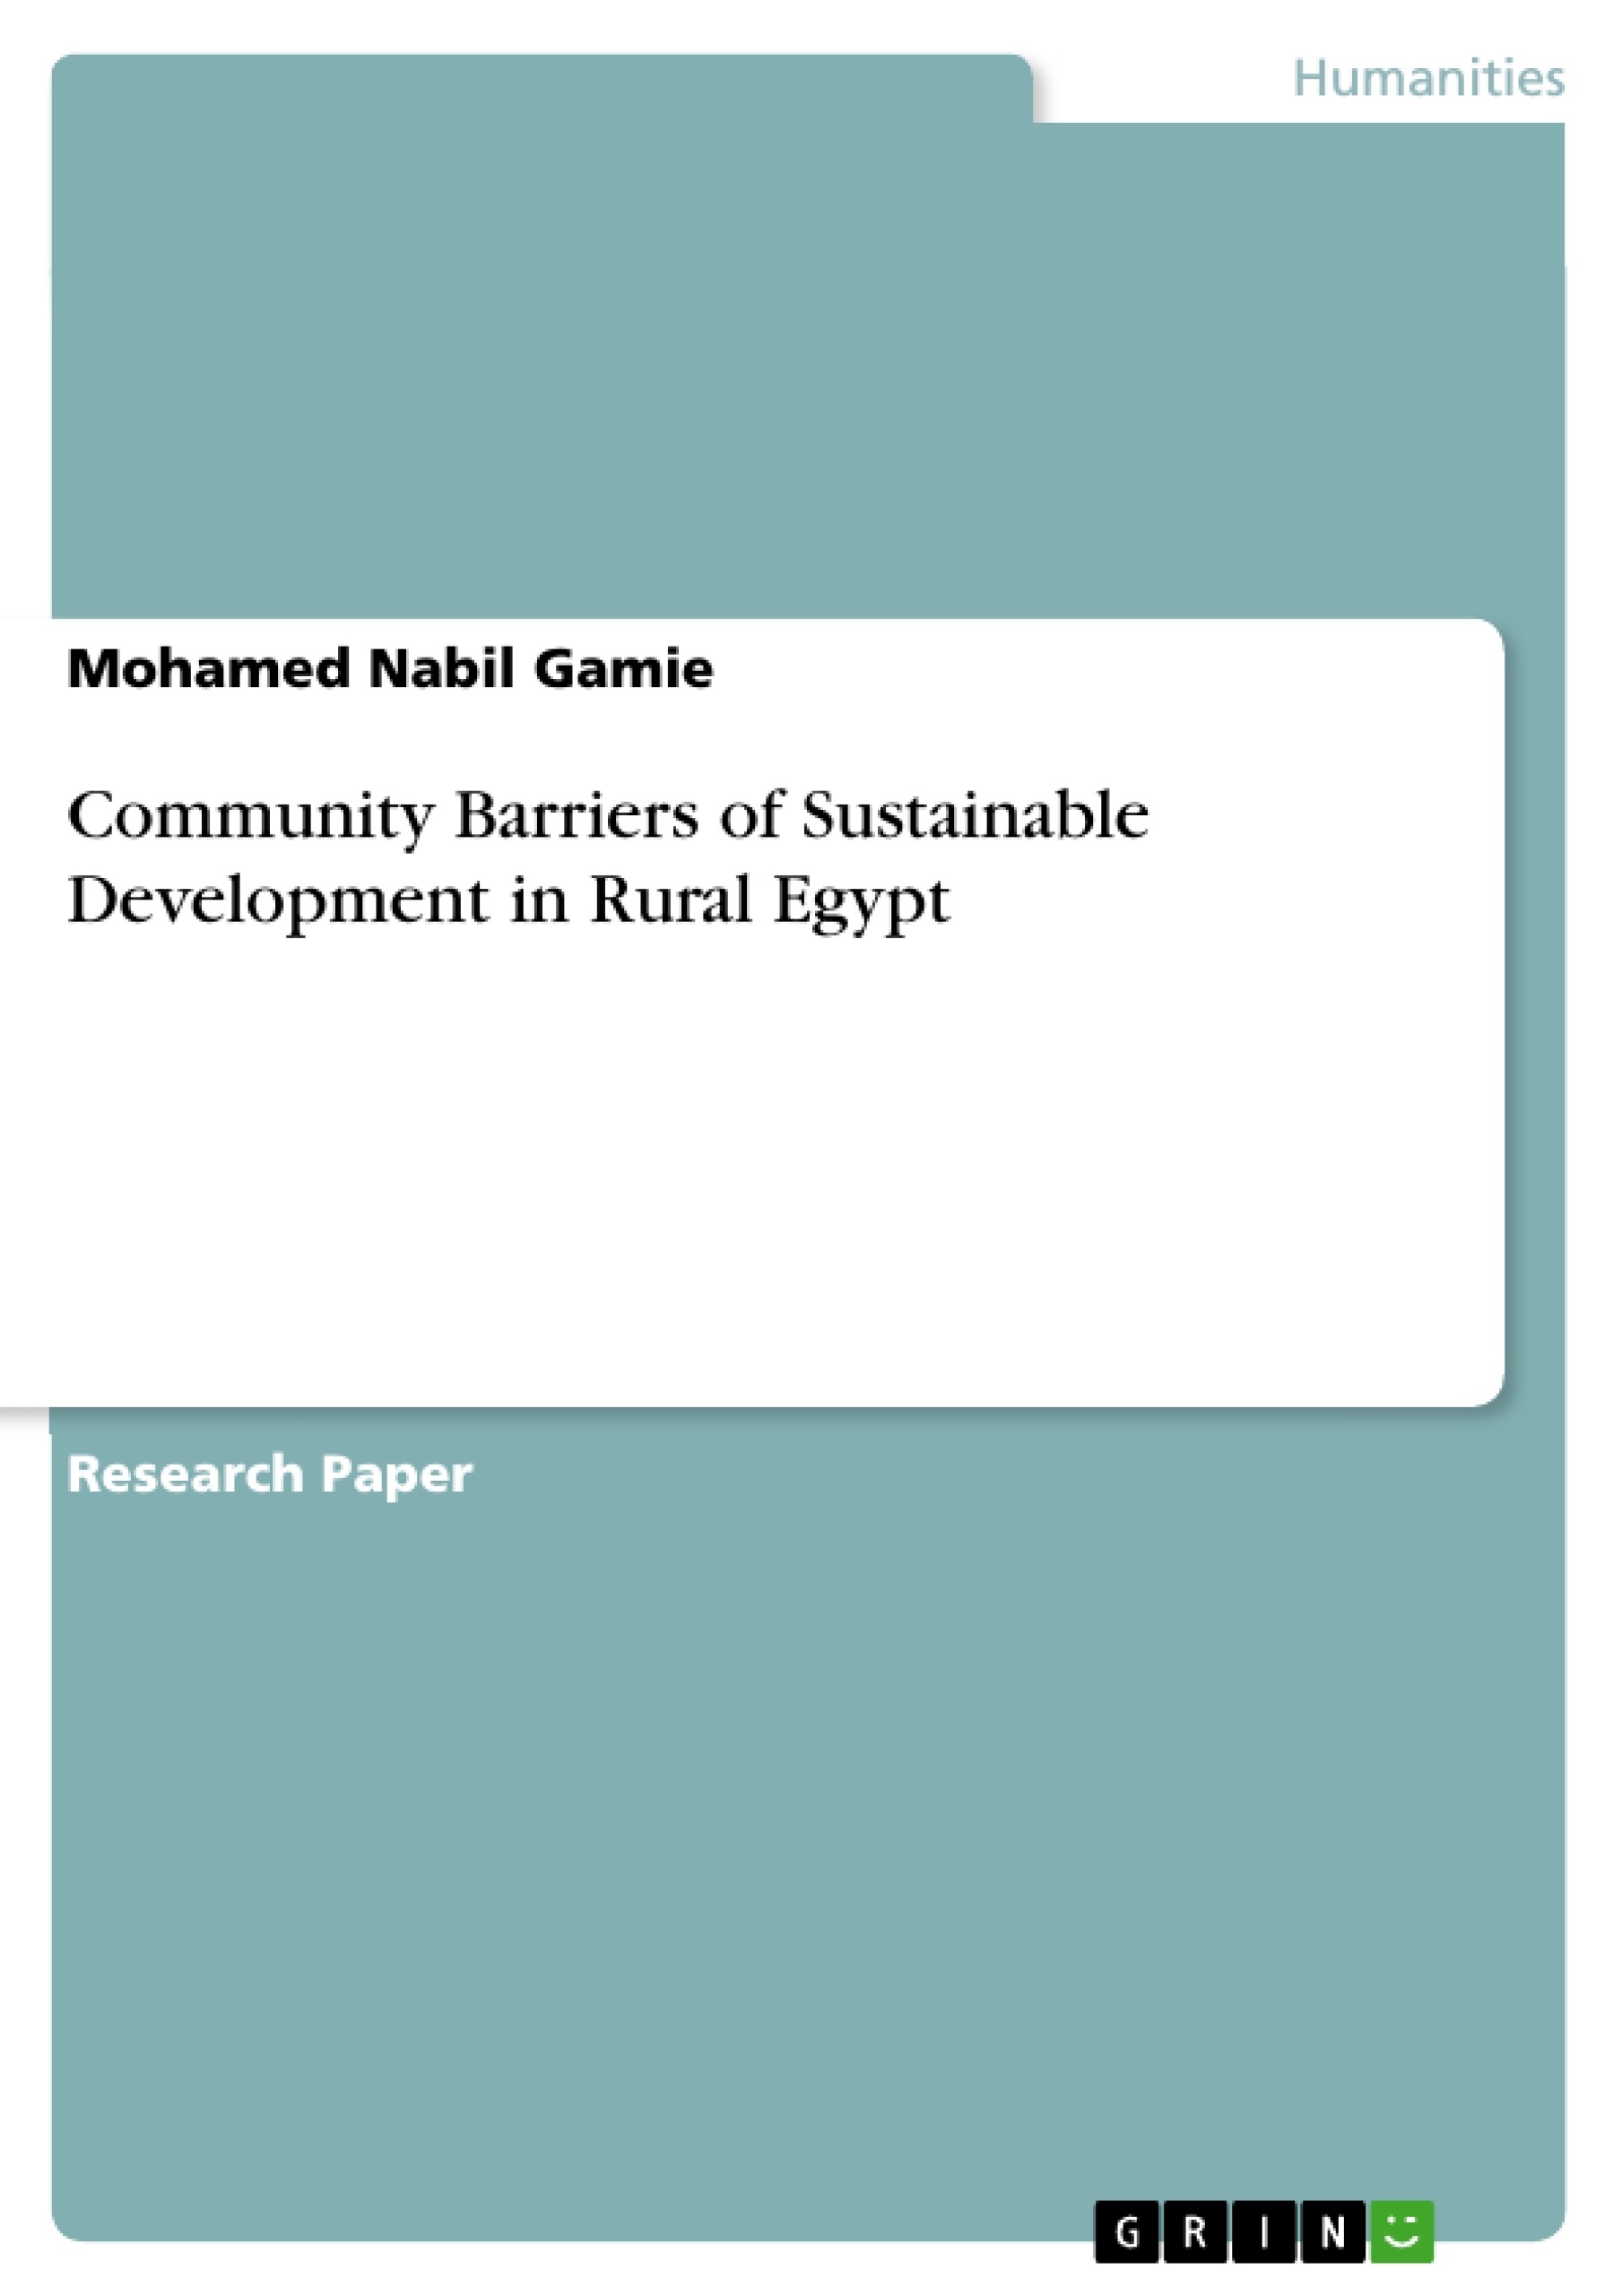 Titre: Community Barriers of Sustainable Development in Rural Egypt